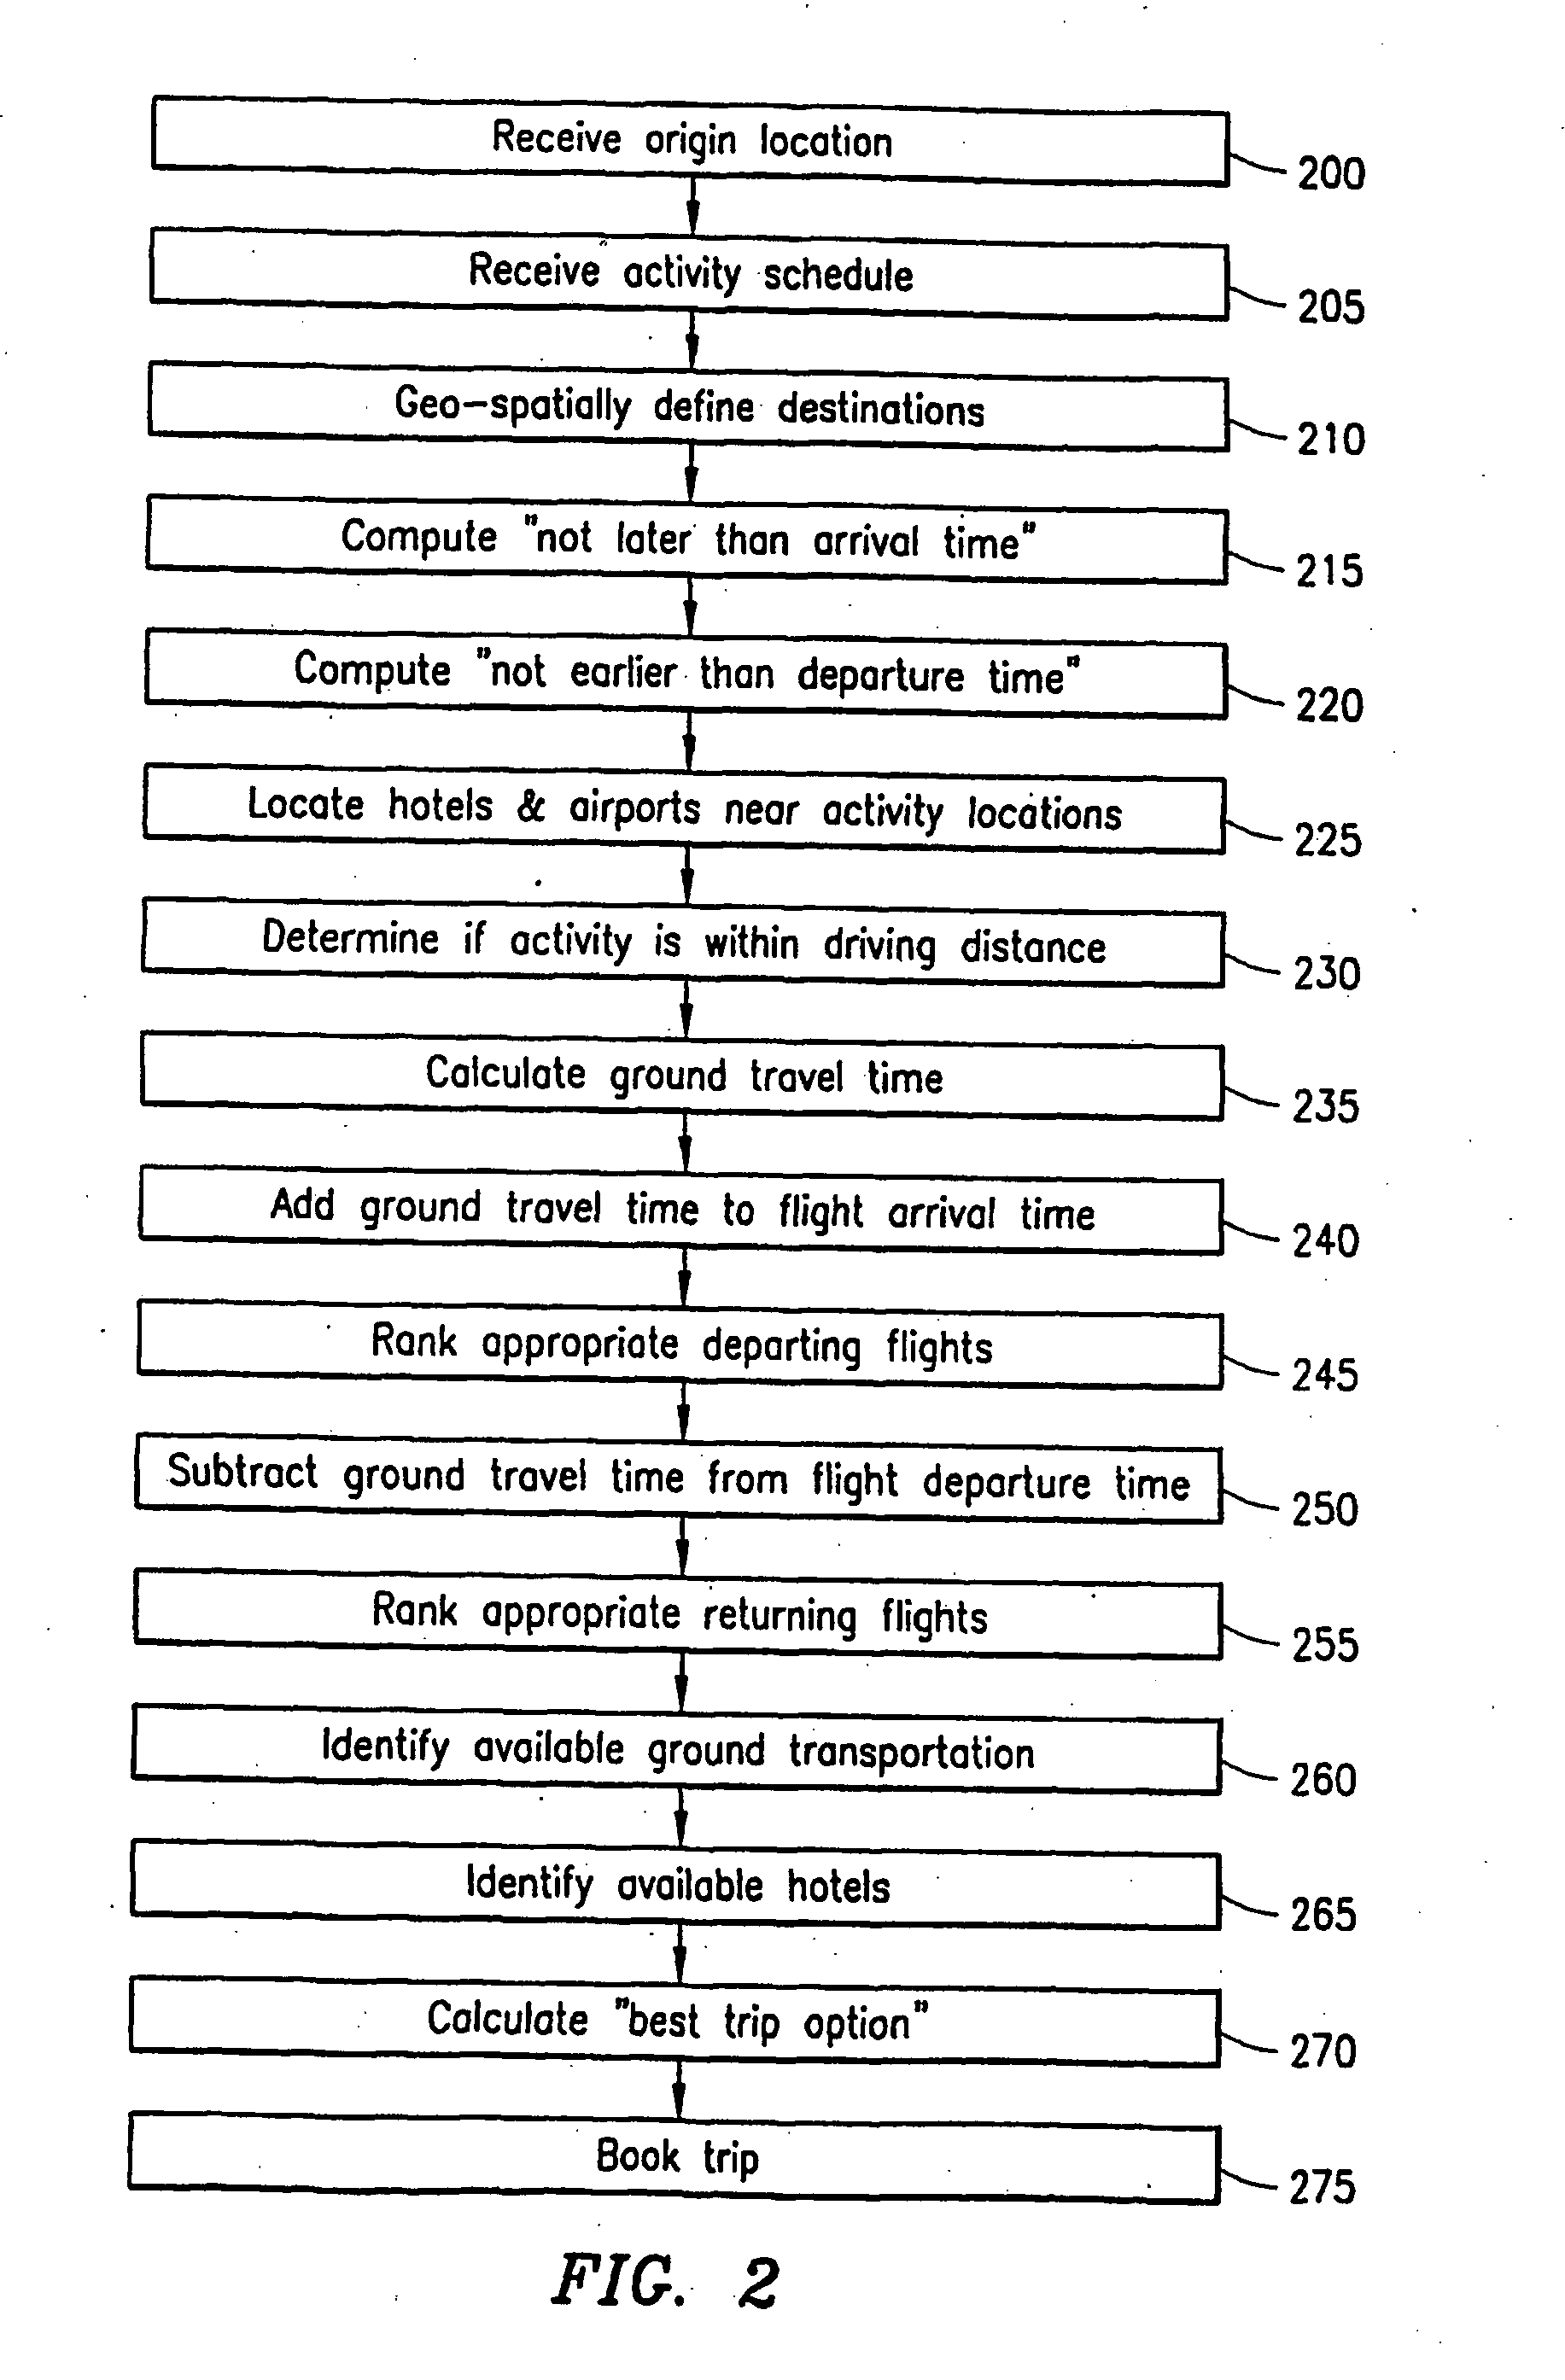 Method and apparatus for transportation planning and logistical management